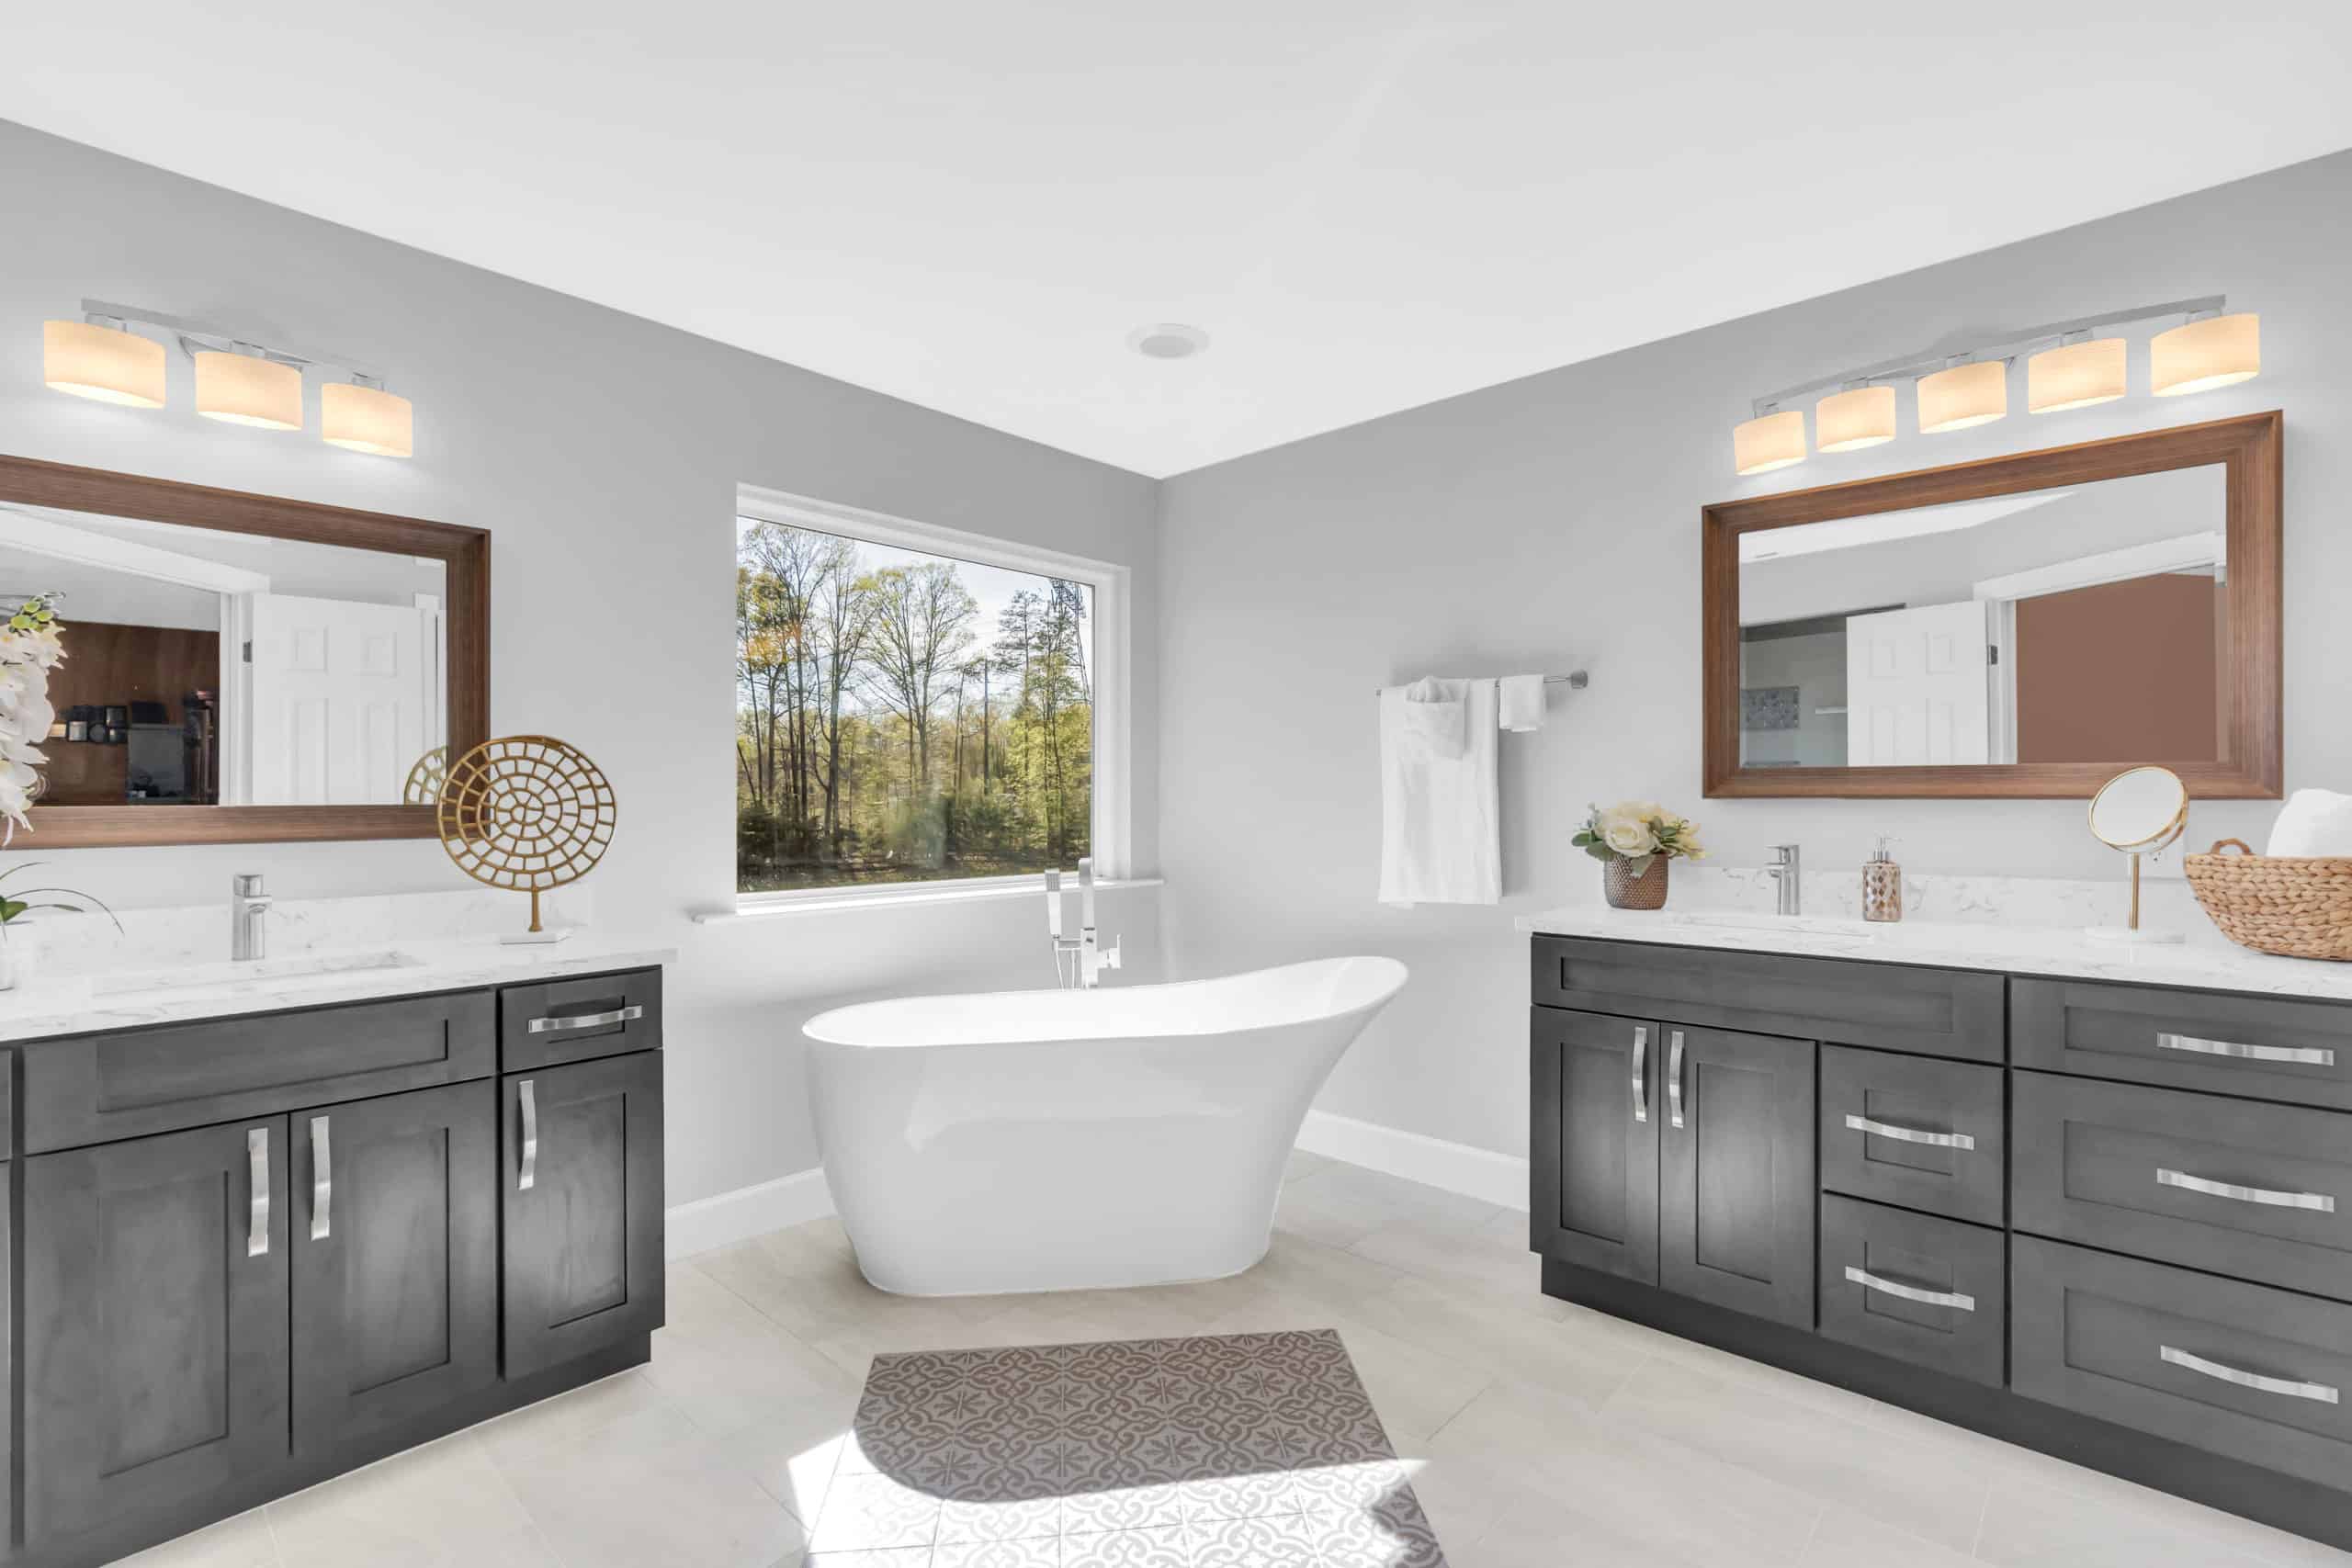 Elegant bathroom with 2 separated gray vanities and tub in middle